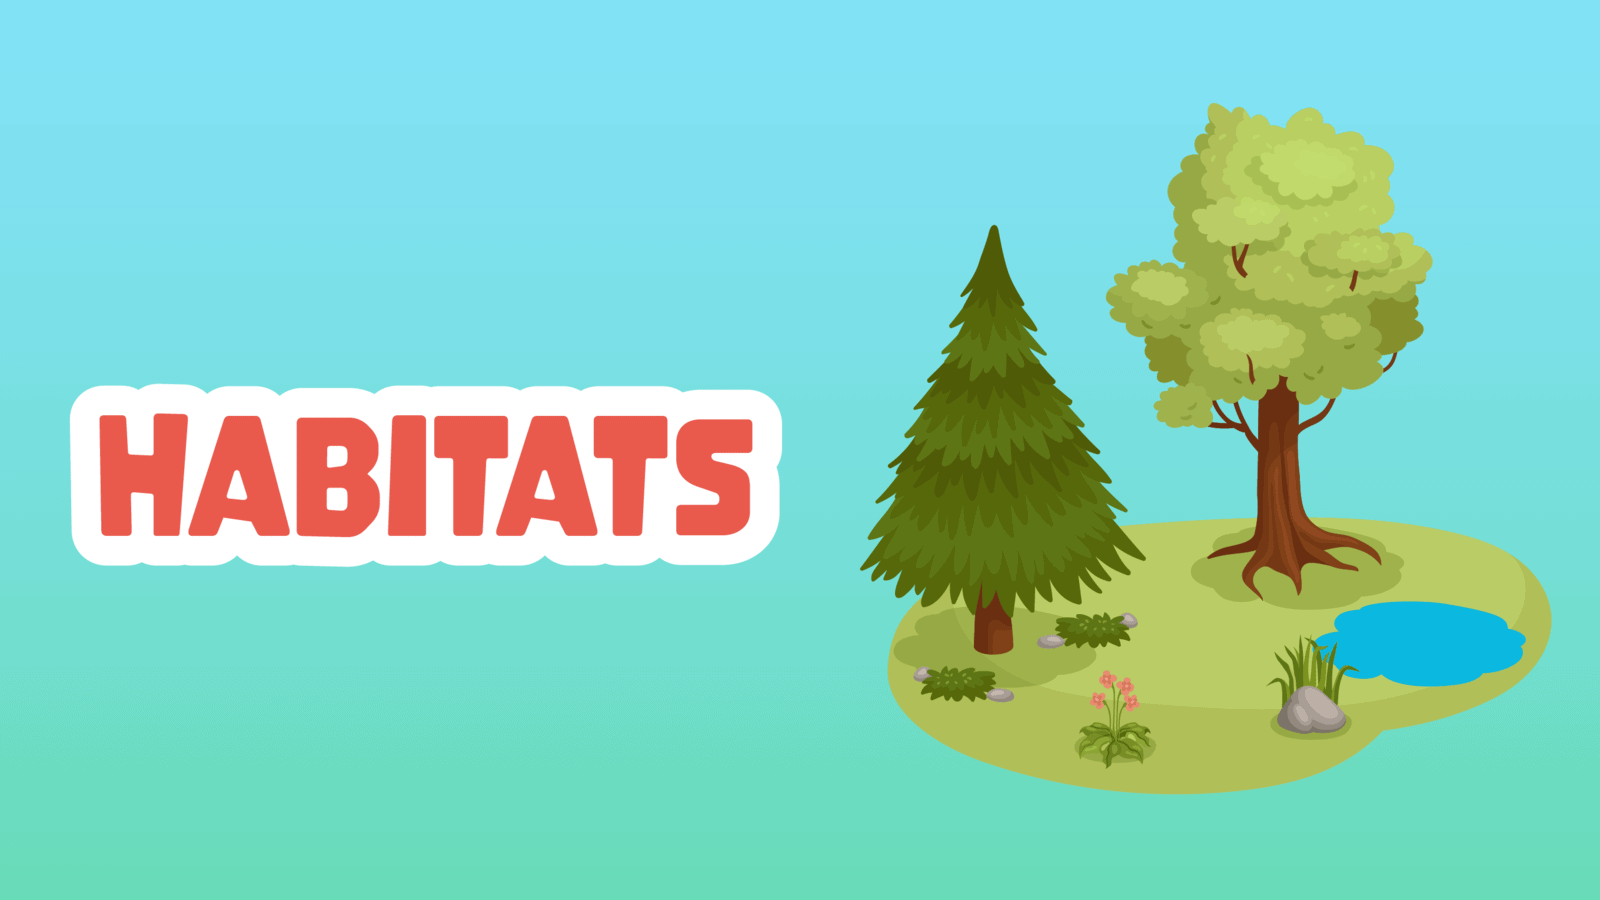 Habitats Facts for Kids – 5 Helpful Facts about Habitats